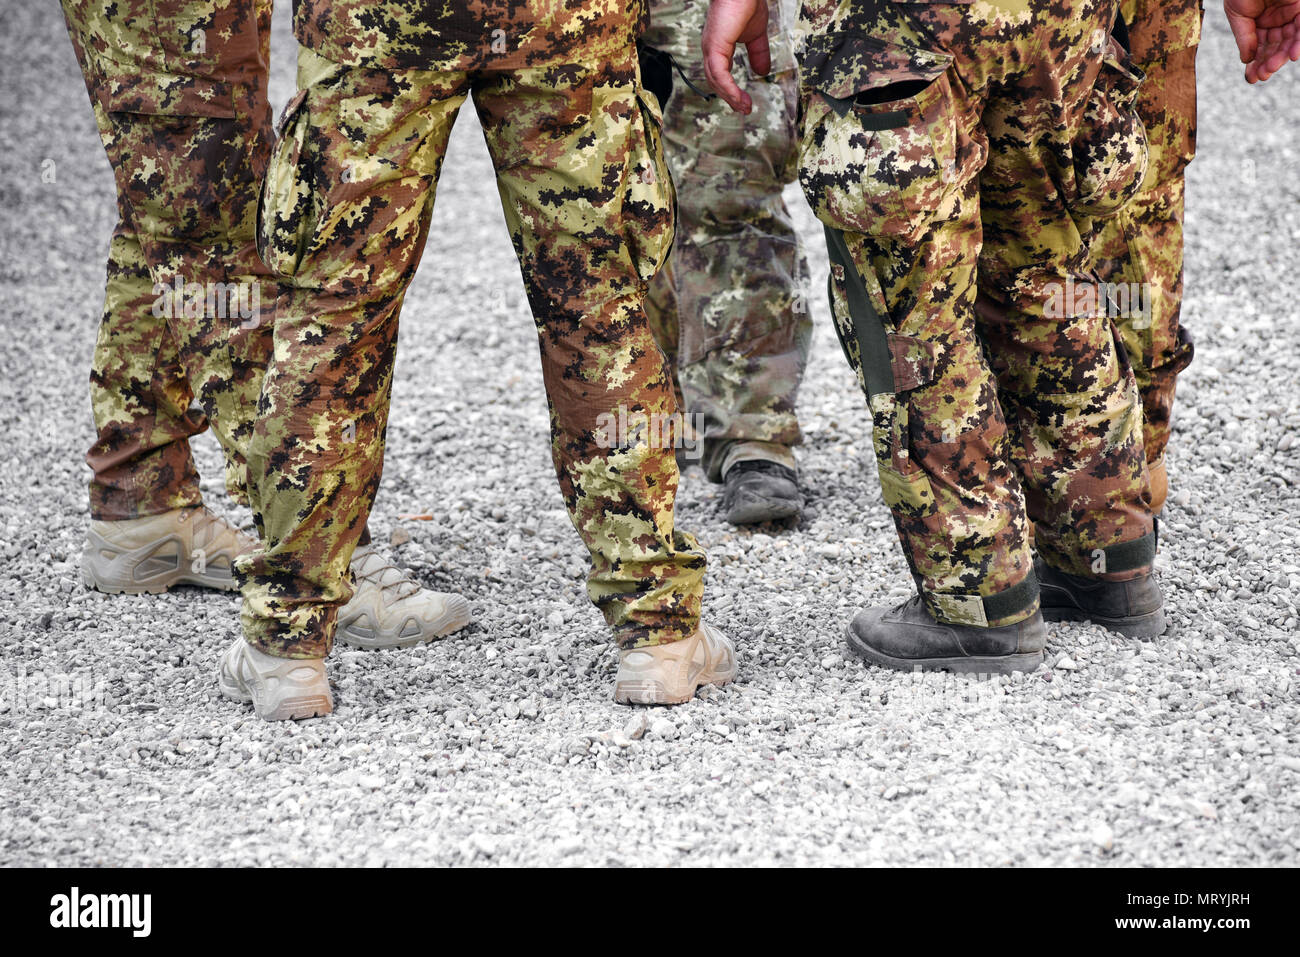 Group of soldiers wearing camouflage fatigues in a low angle view of their legs on gravel Stock Photo